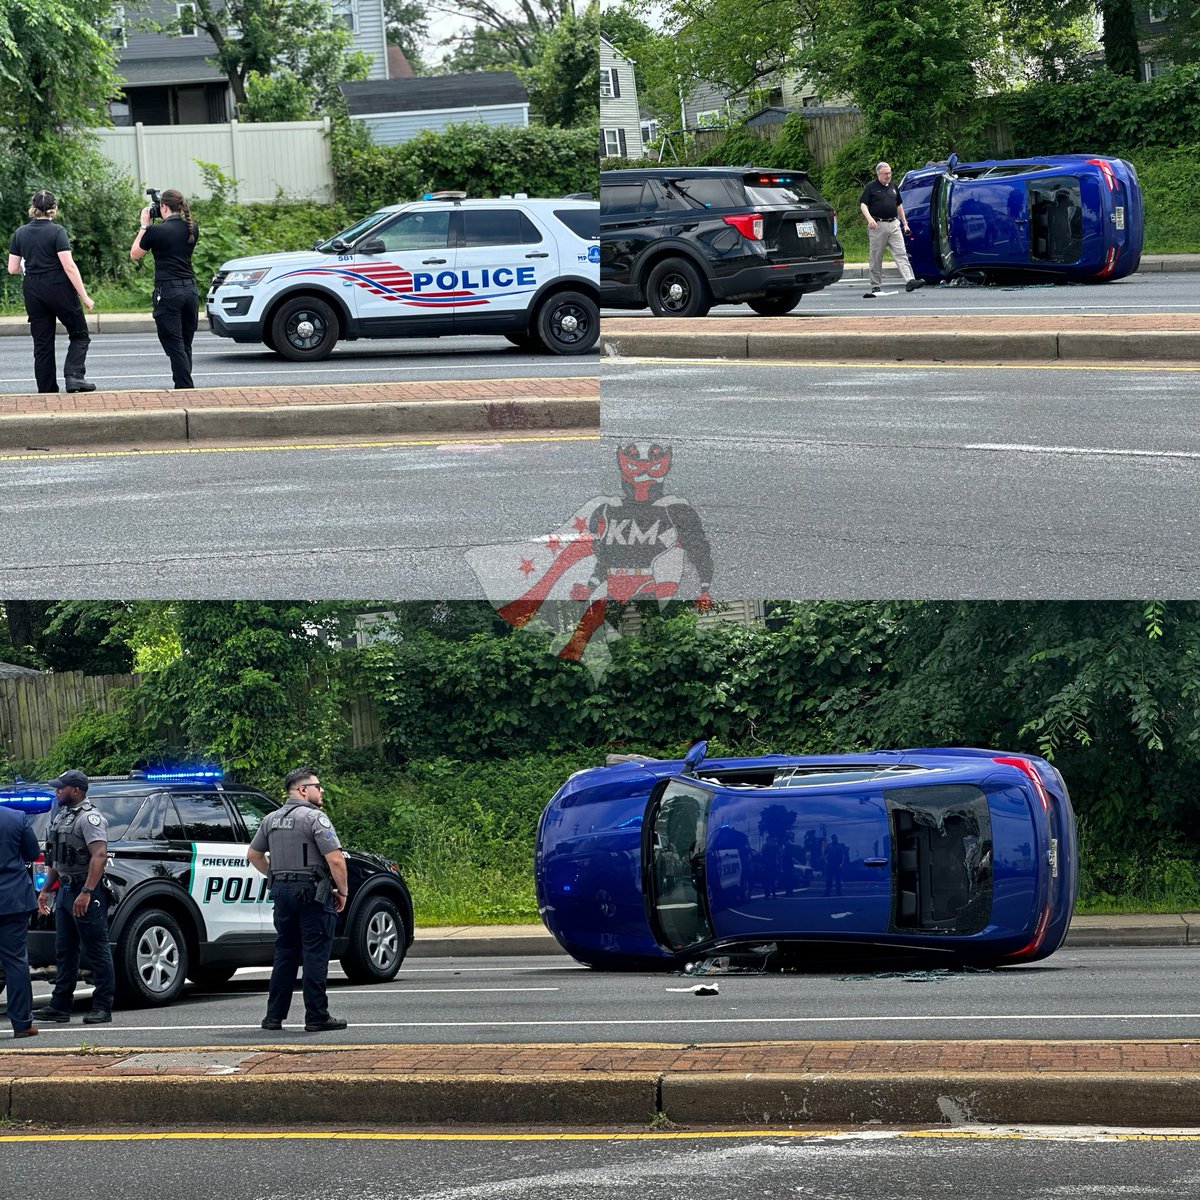 More photos from the shooting/ pursuit that left an MPD Captain injured after an attempted car jacking